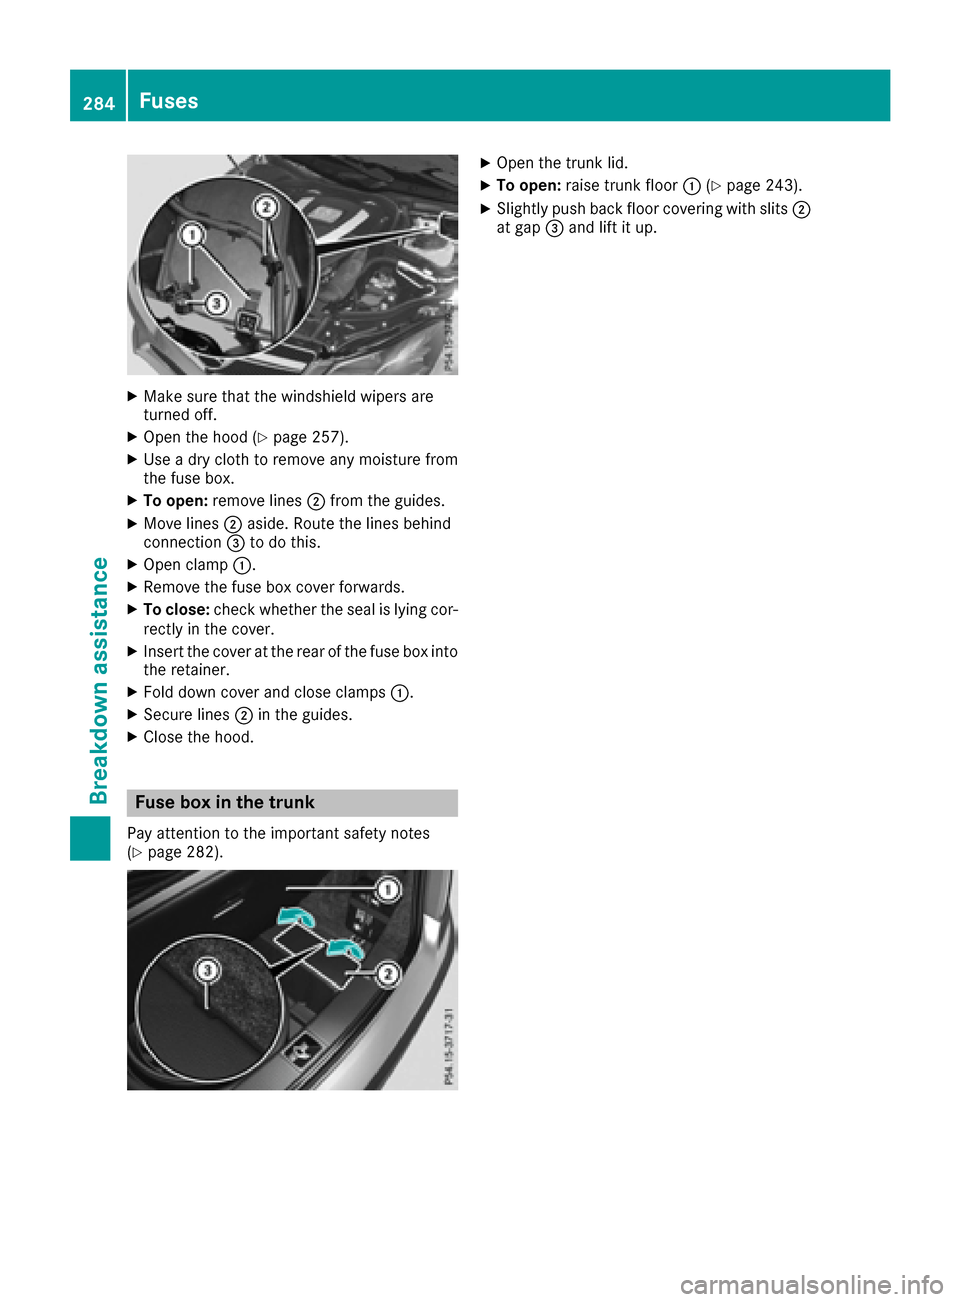 MERCEDES-BENZ E-Class CABRIOLET 2017 A207 Owners Manual XMake sure that the windshield wipers are
turned off.
XOpen the hood (Ypage 257).
XUse a dry cloth to remove any moisture from
the fuse box.
XTo open:remove lines ;from the guides.
XMove lines ;aside.